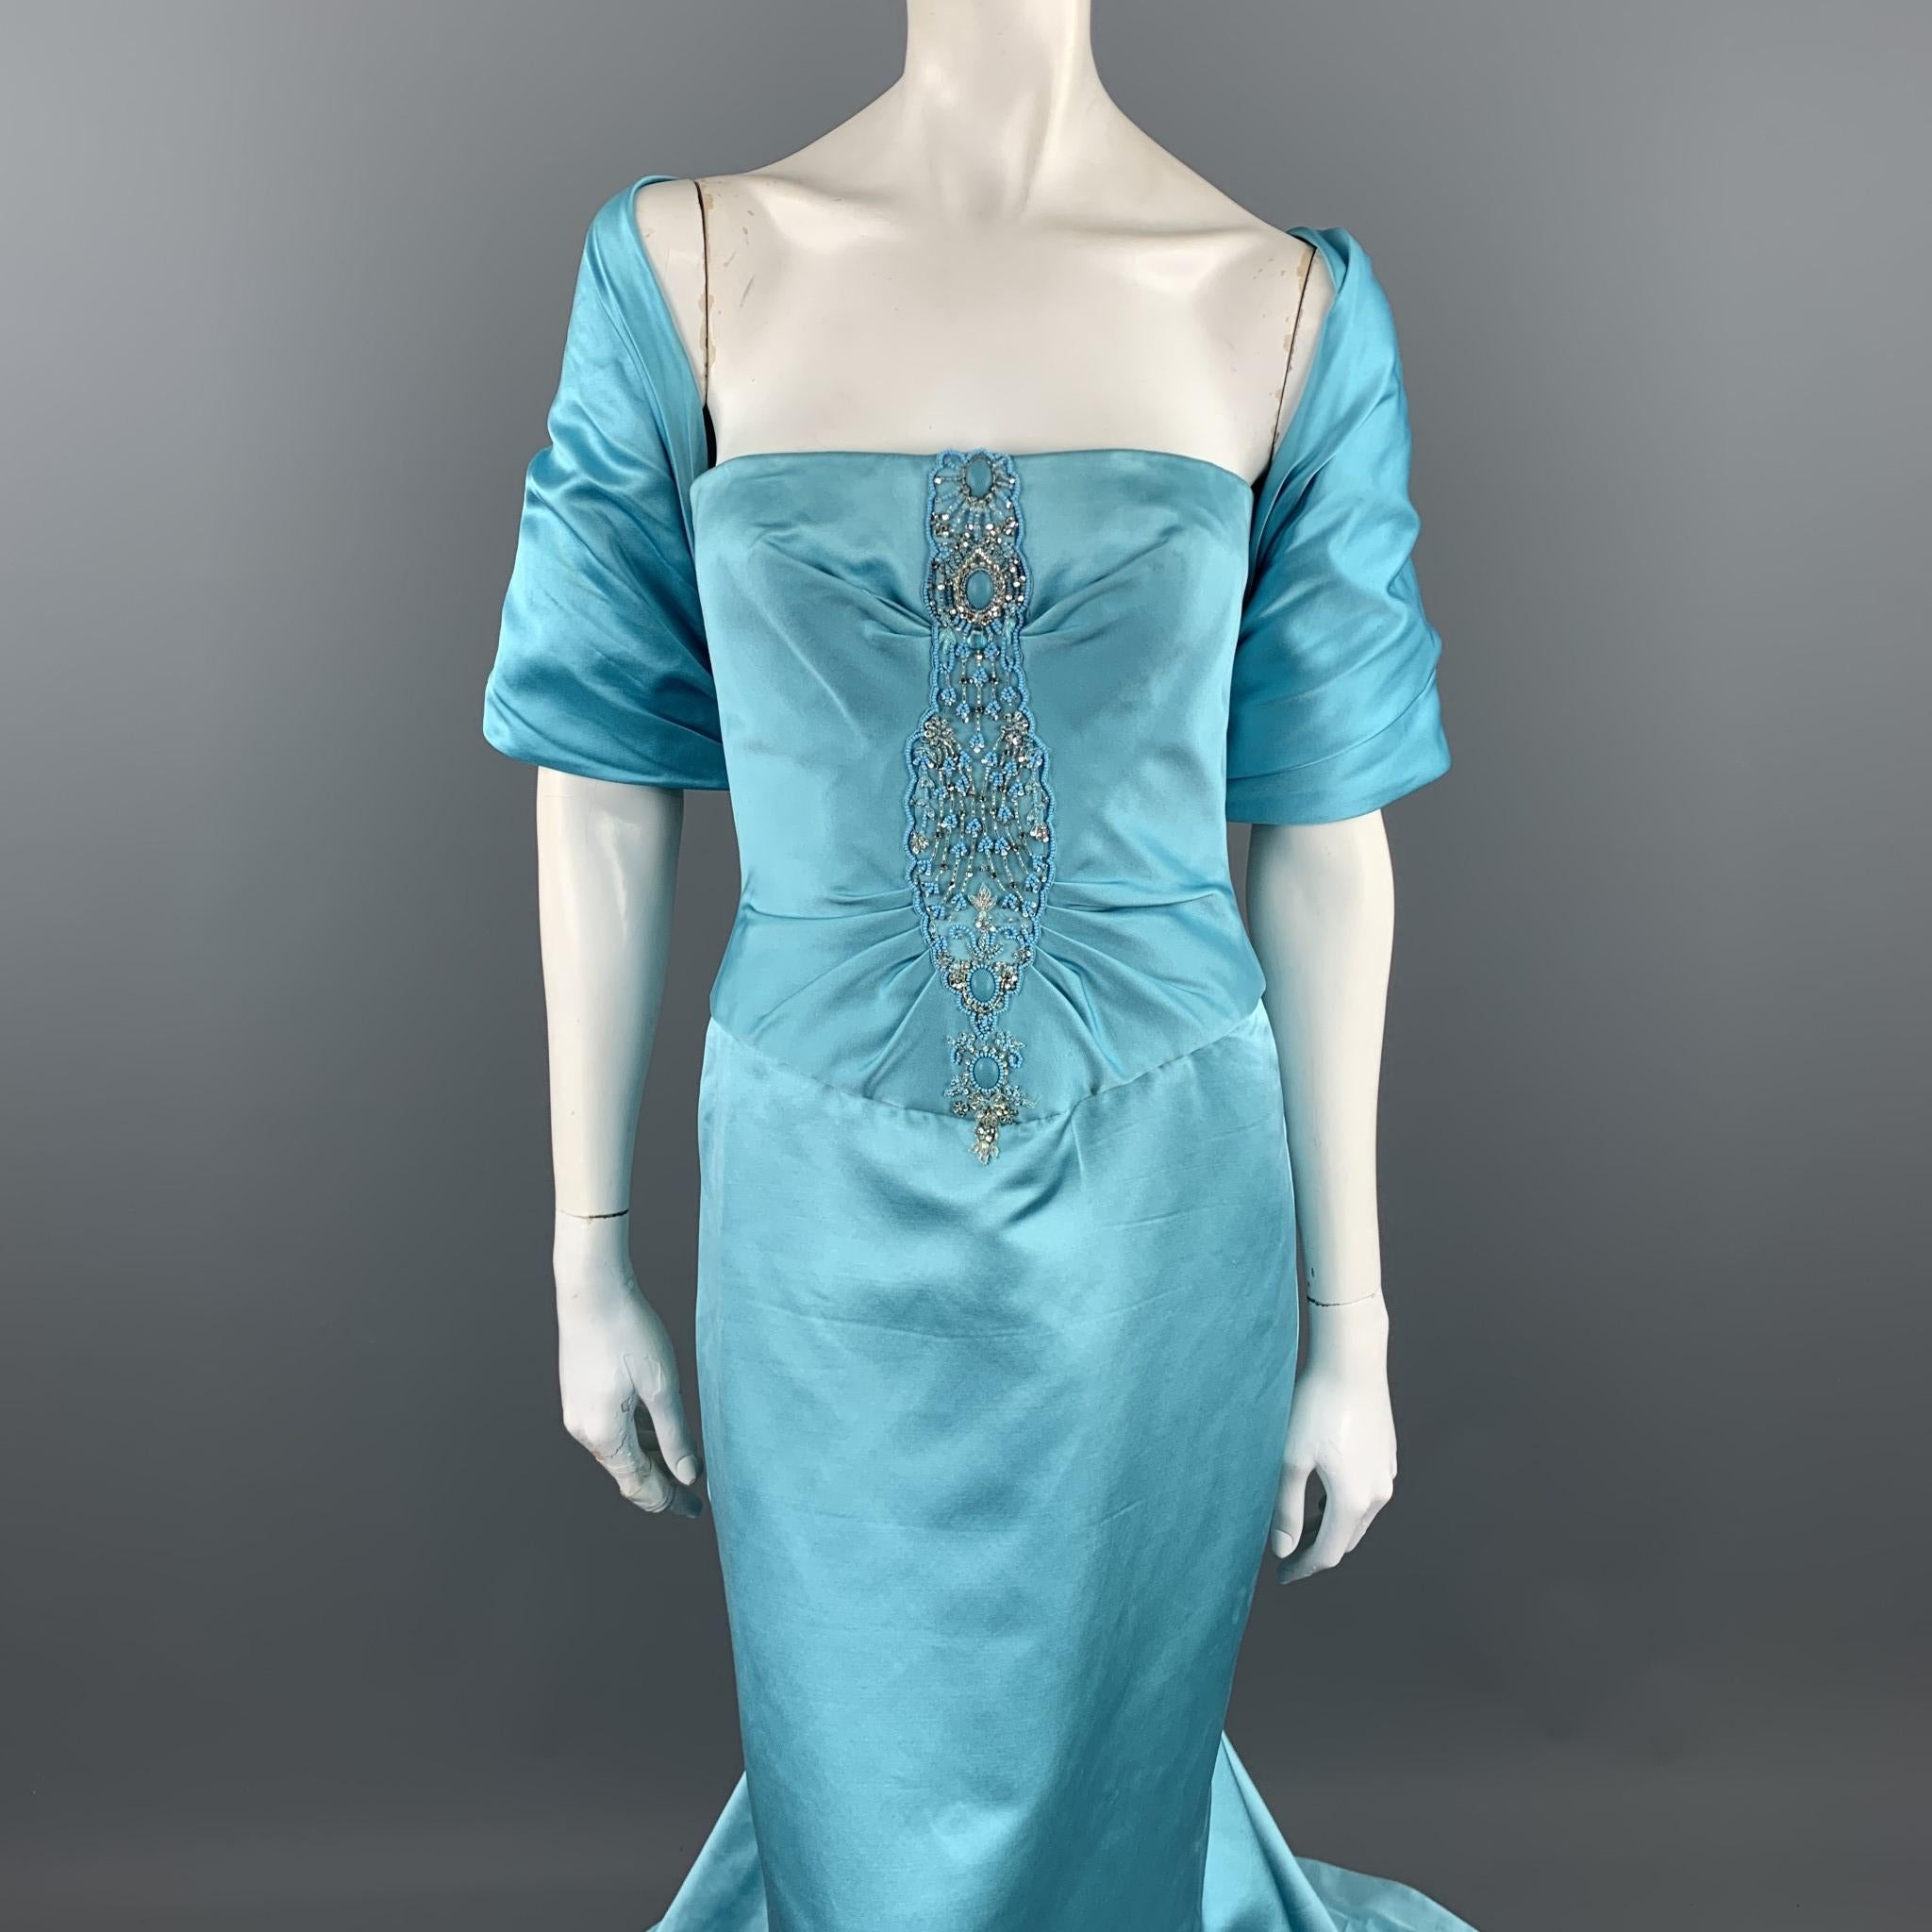 REEM ACRA strapless evening gown comes in light blue silk satin with a beaded bustier bodice, trumpet skirt with ruched back and matching ruched bolero shrug jacket. Wear around neckline and collar. As-Is. Made in USA.

Good Pre-Owned